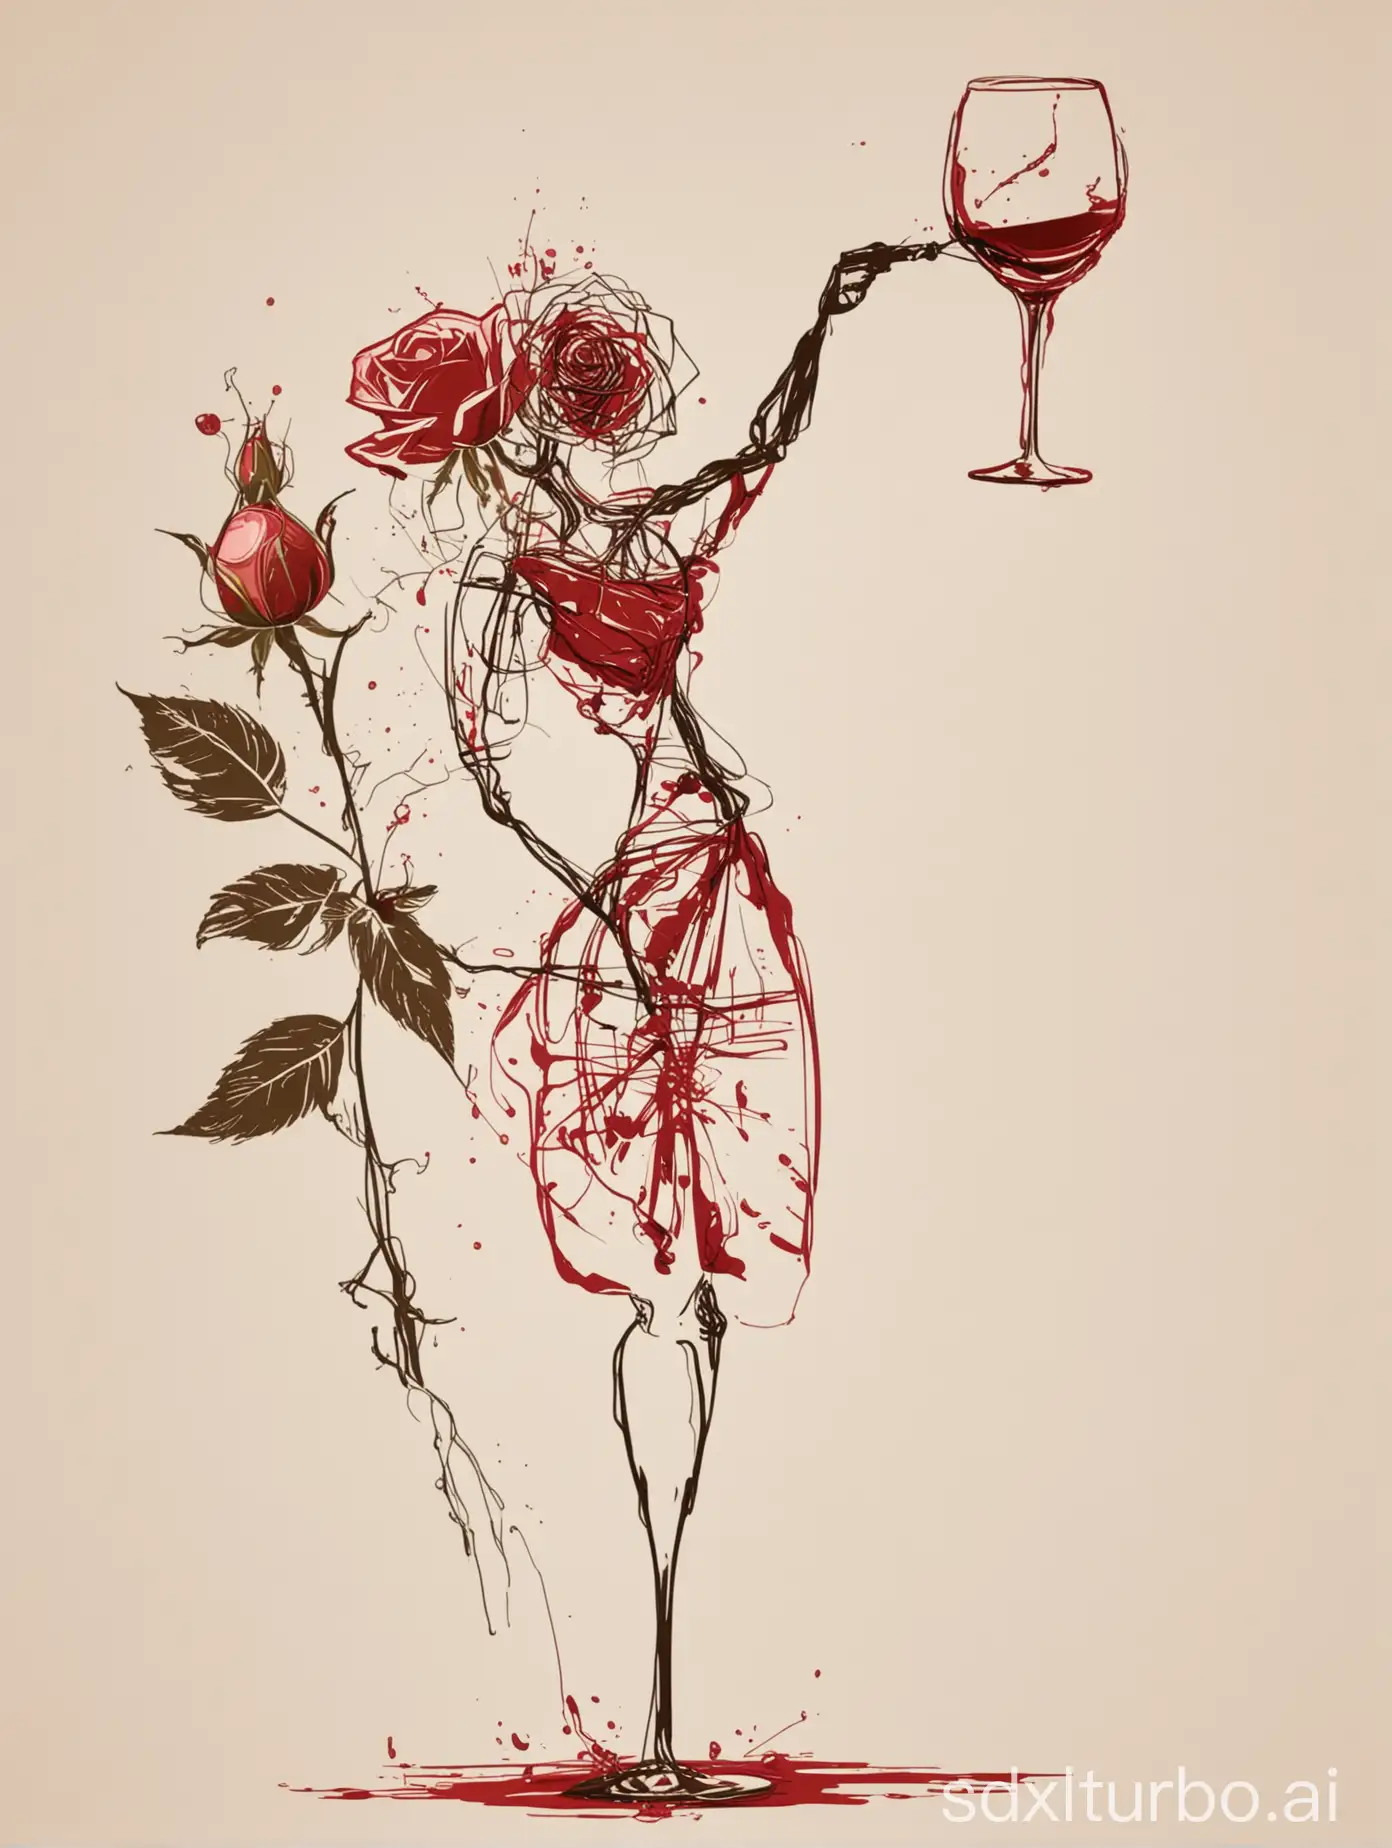 from smudges and shading emerges an abstract figure study, posed, stick figure rose, with a full open blossom, drinking wine, against a white background, in the vector illustrations style with flat design, minimalism, clean lines, at high resolution with high detail